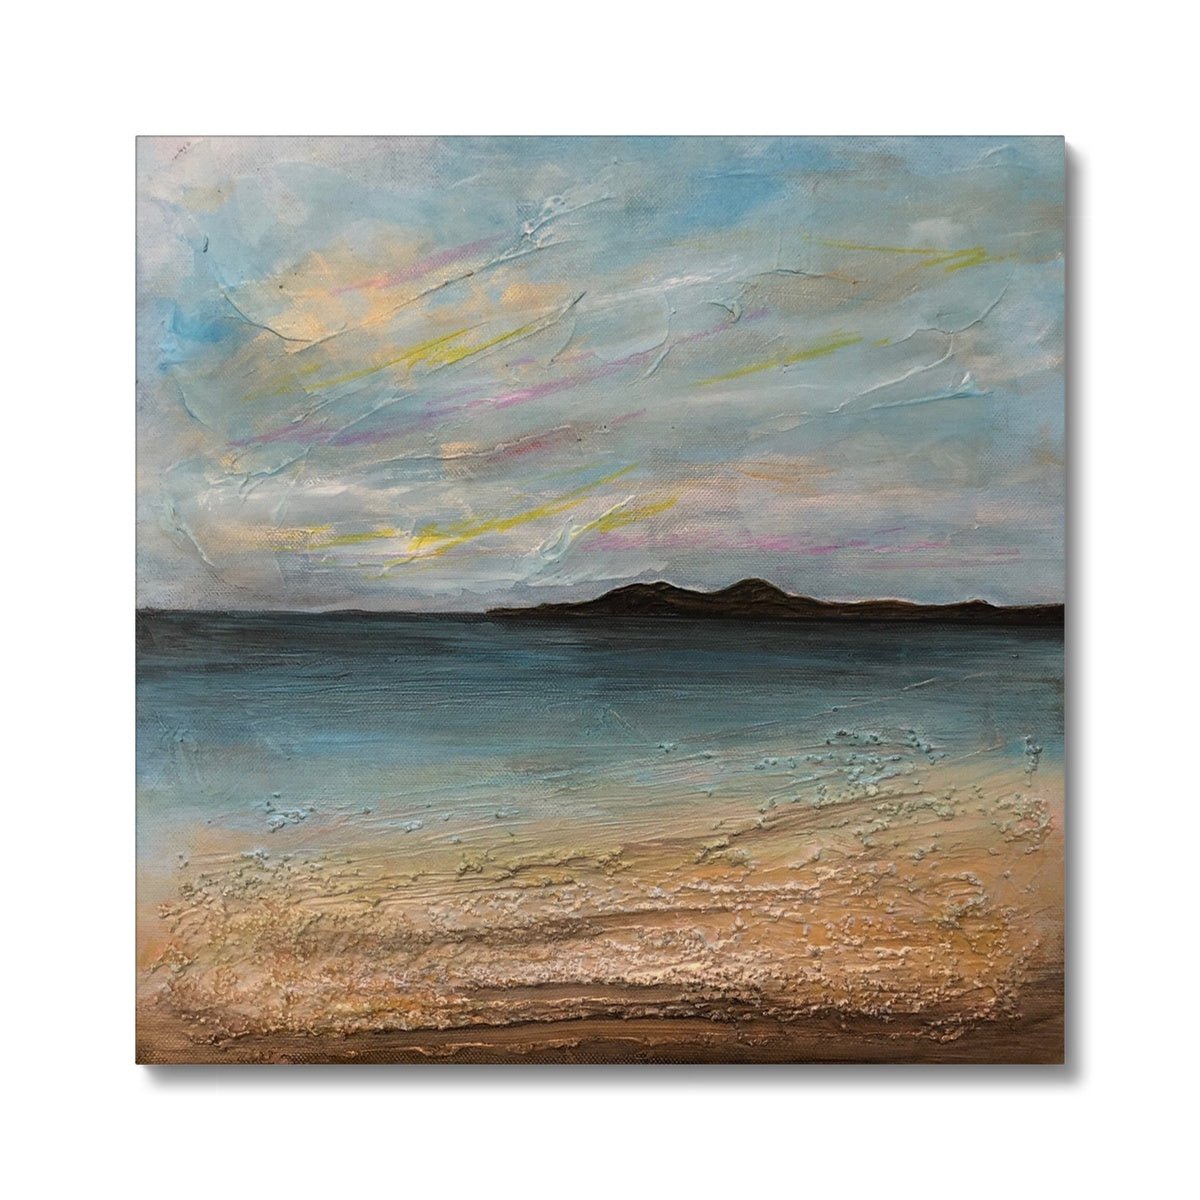 Garrynamonie Beach South Uist Painting | Canvas From Scotland-Contemporary Stretched Canvas Prints-Hebridean Islands Art Gallery-24"x24"-Paintings, Prints, Homeware, Art Gifts From Scotland By Scottish Artist Kevin Hunter